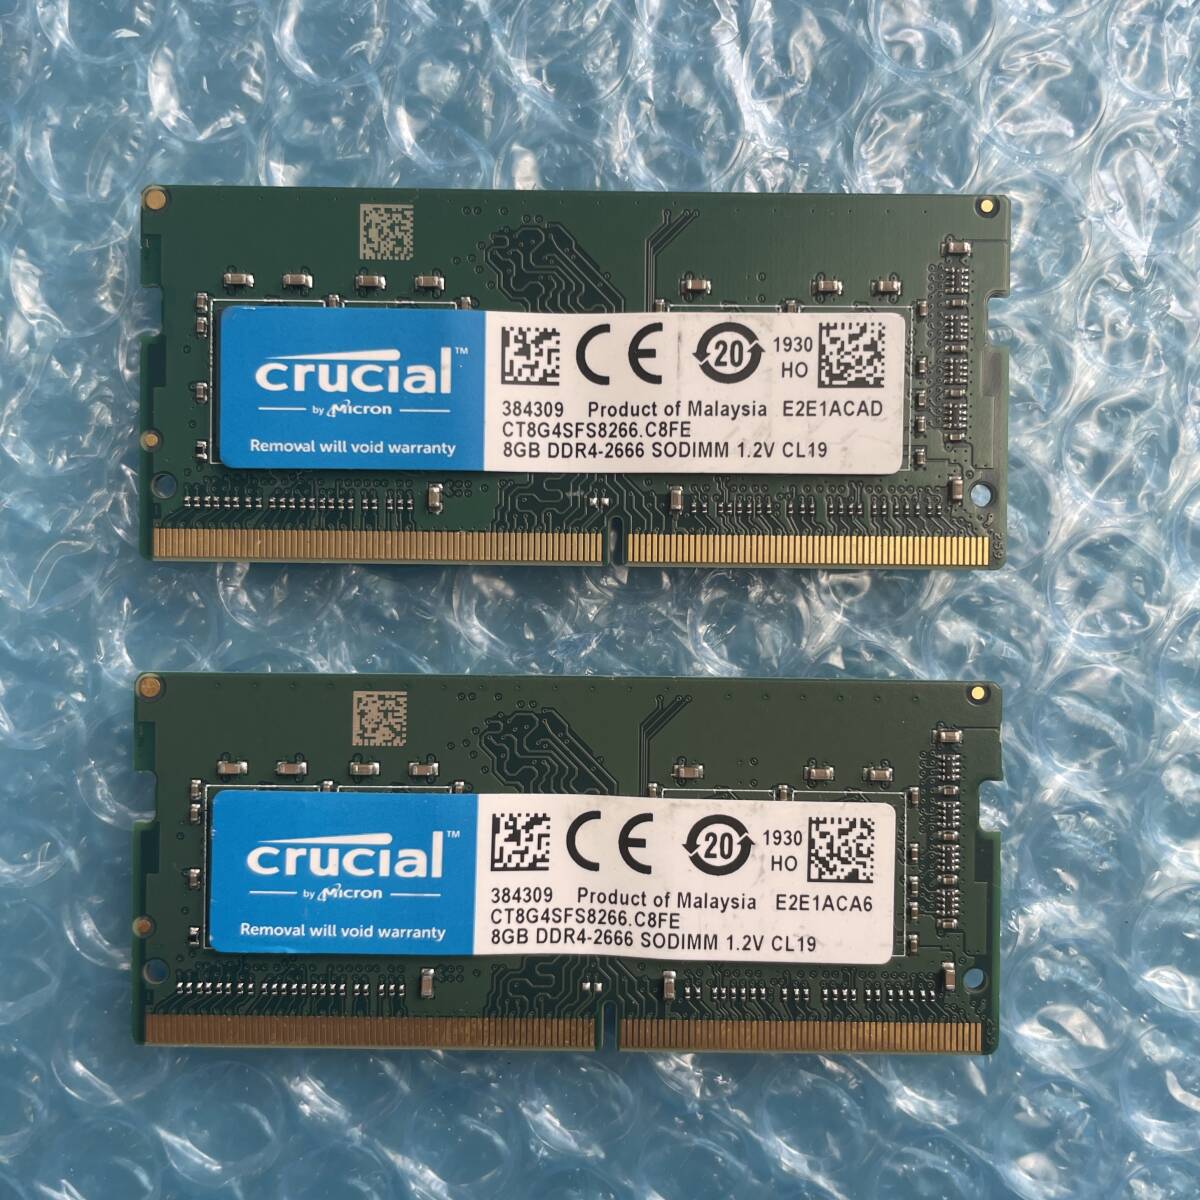 crucial 8GB×2 sheets total 16GB DDR4-2666 1.2V CL19 used Note PC for memory [NM-333]